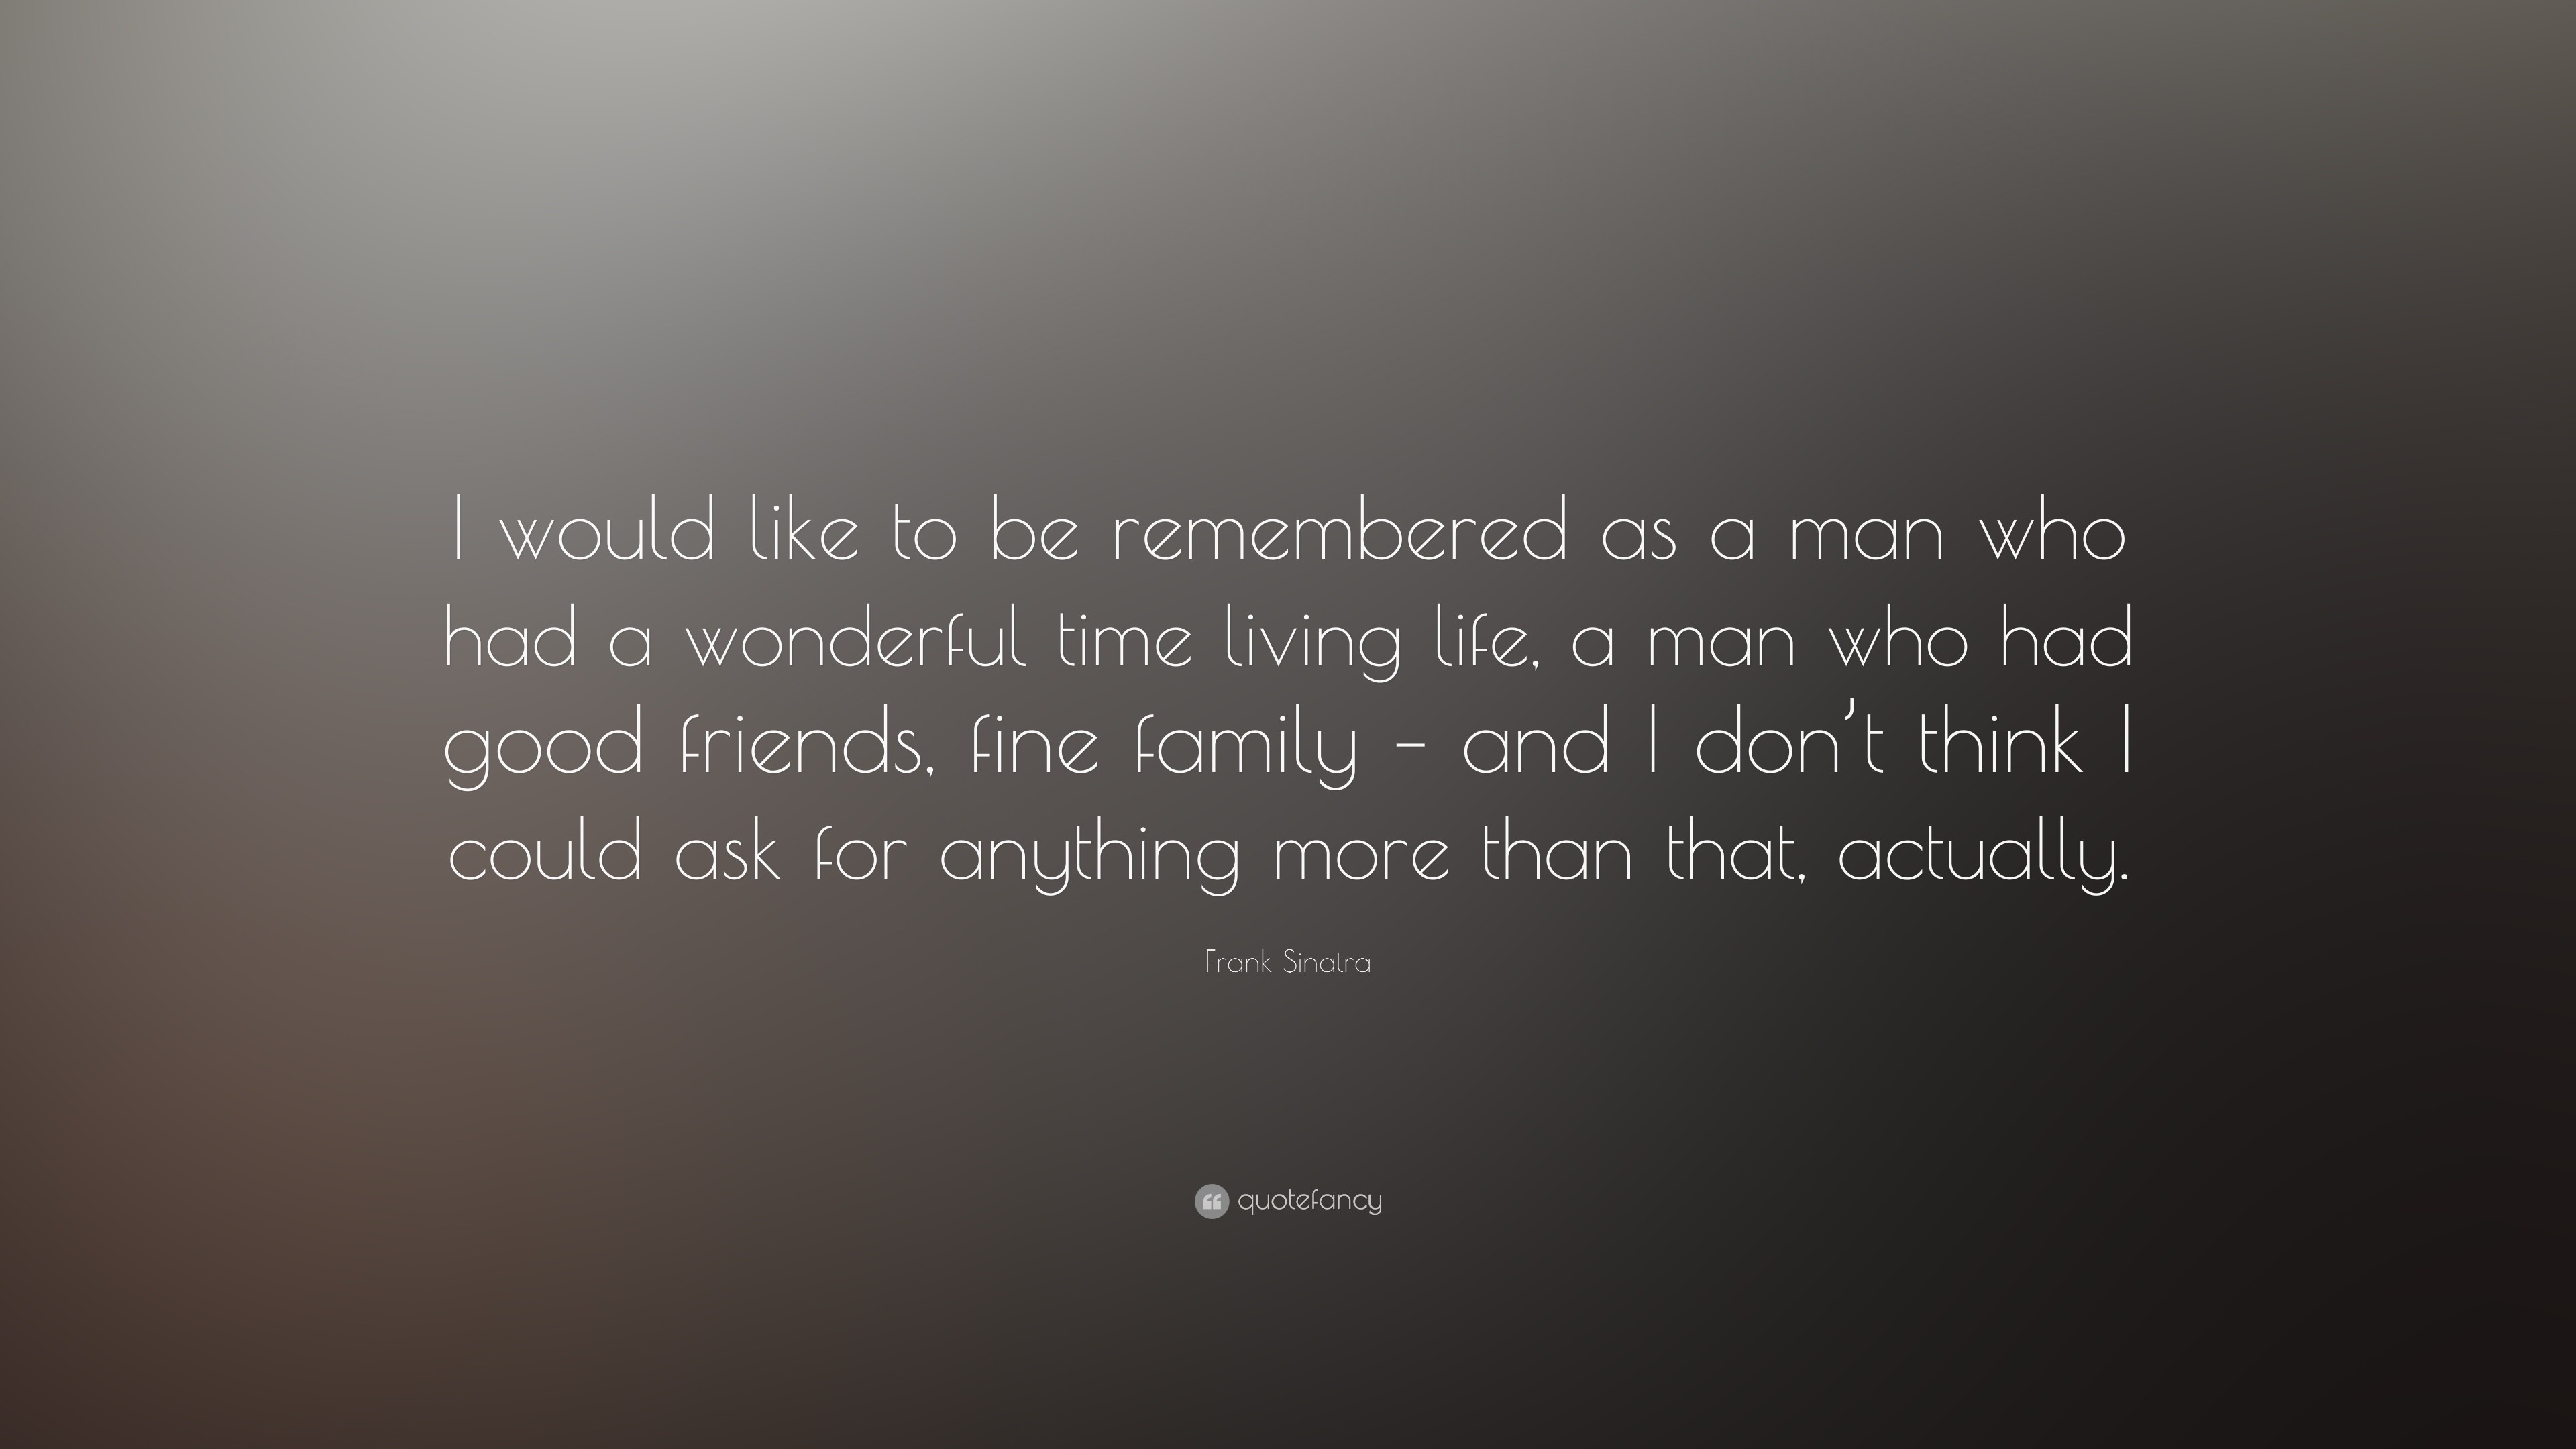 3840x2160 Frank Sinatra Quote: “I would like to be remembered as a man who had